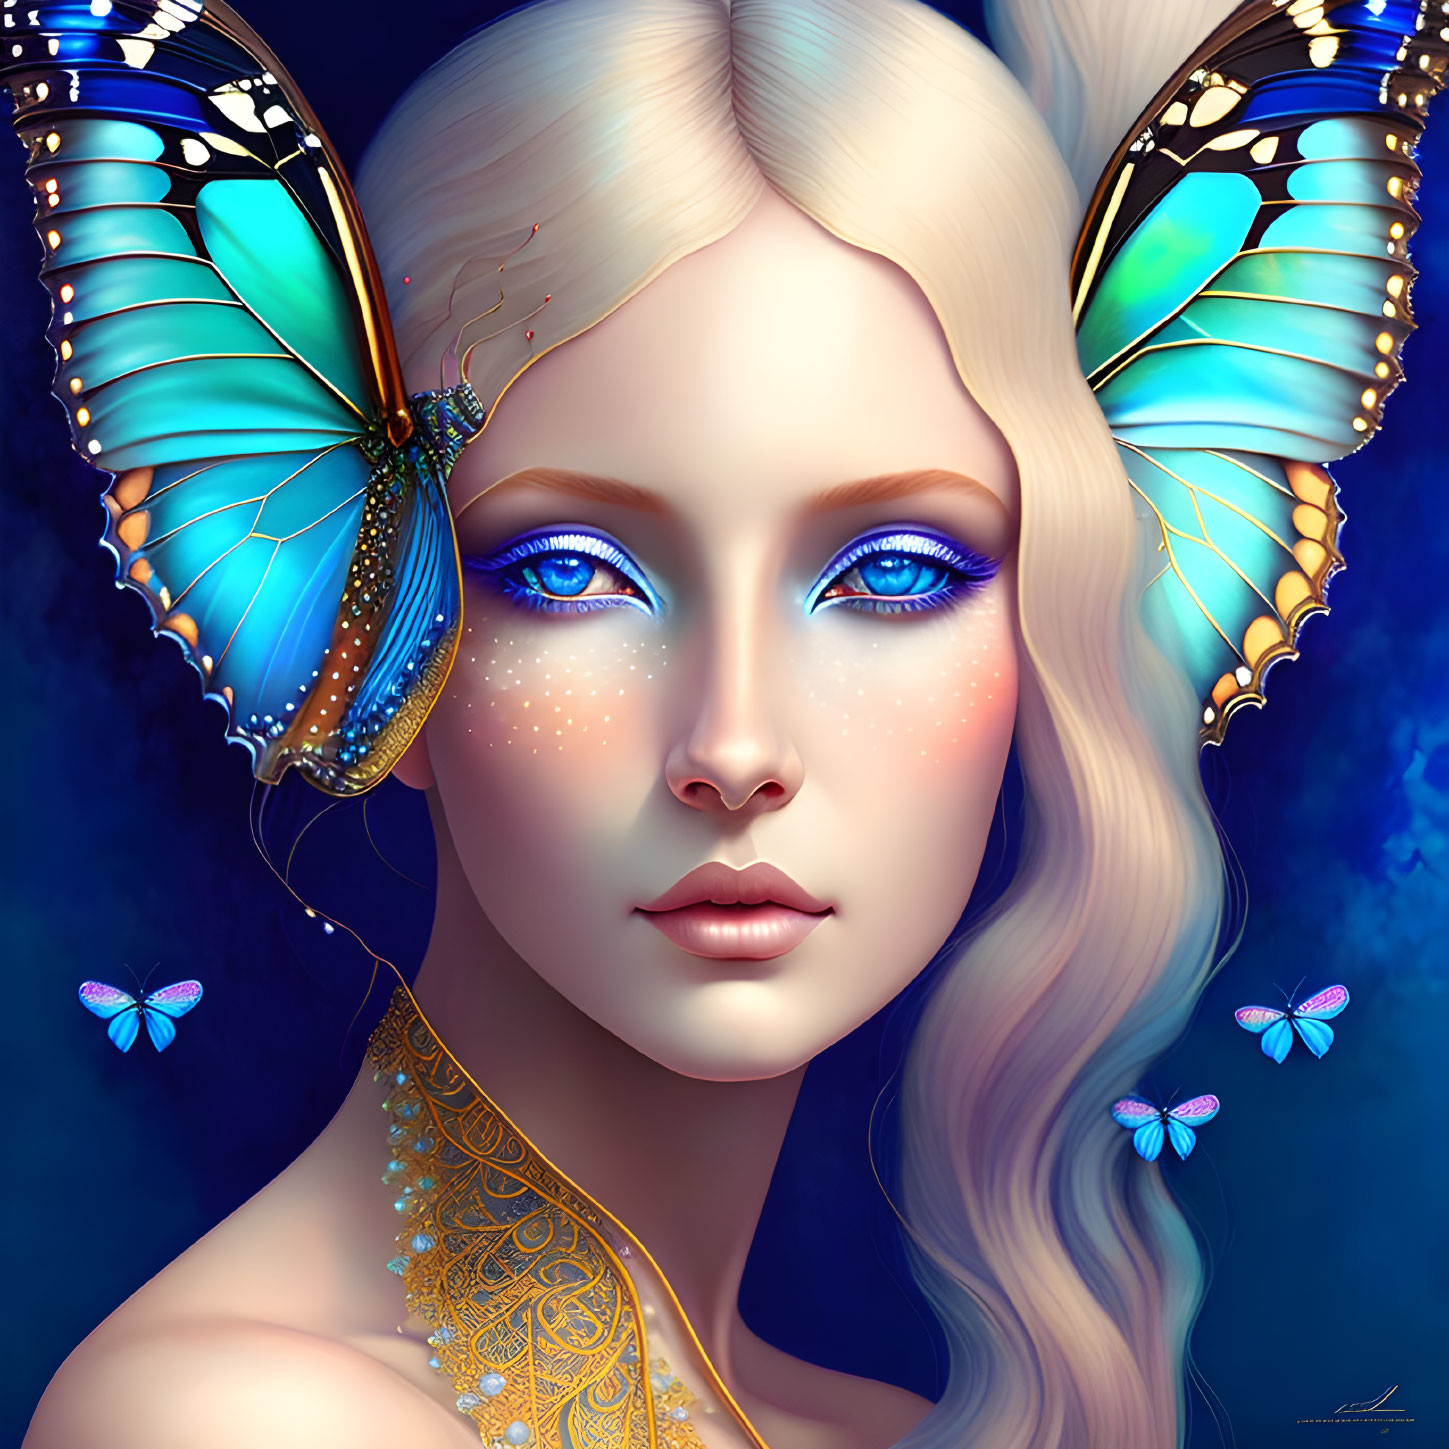 Portrait of woman with blue eyes and butterflies, gold details & ethereal aura